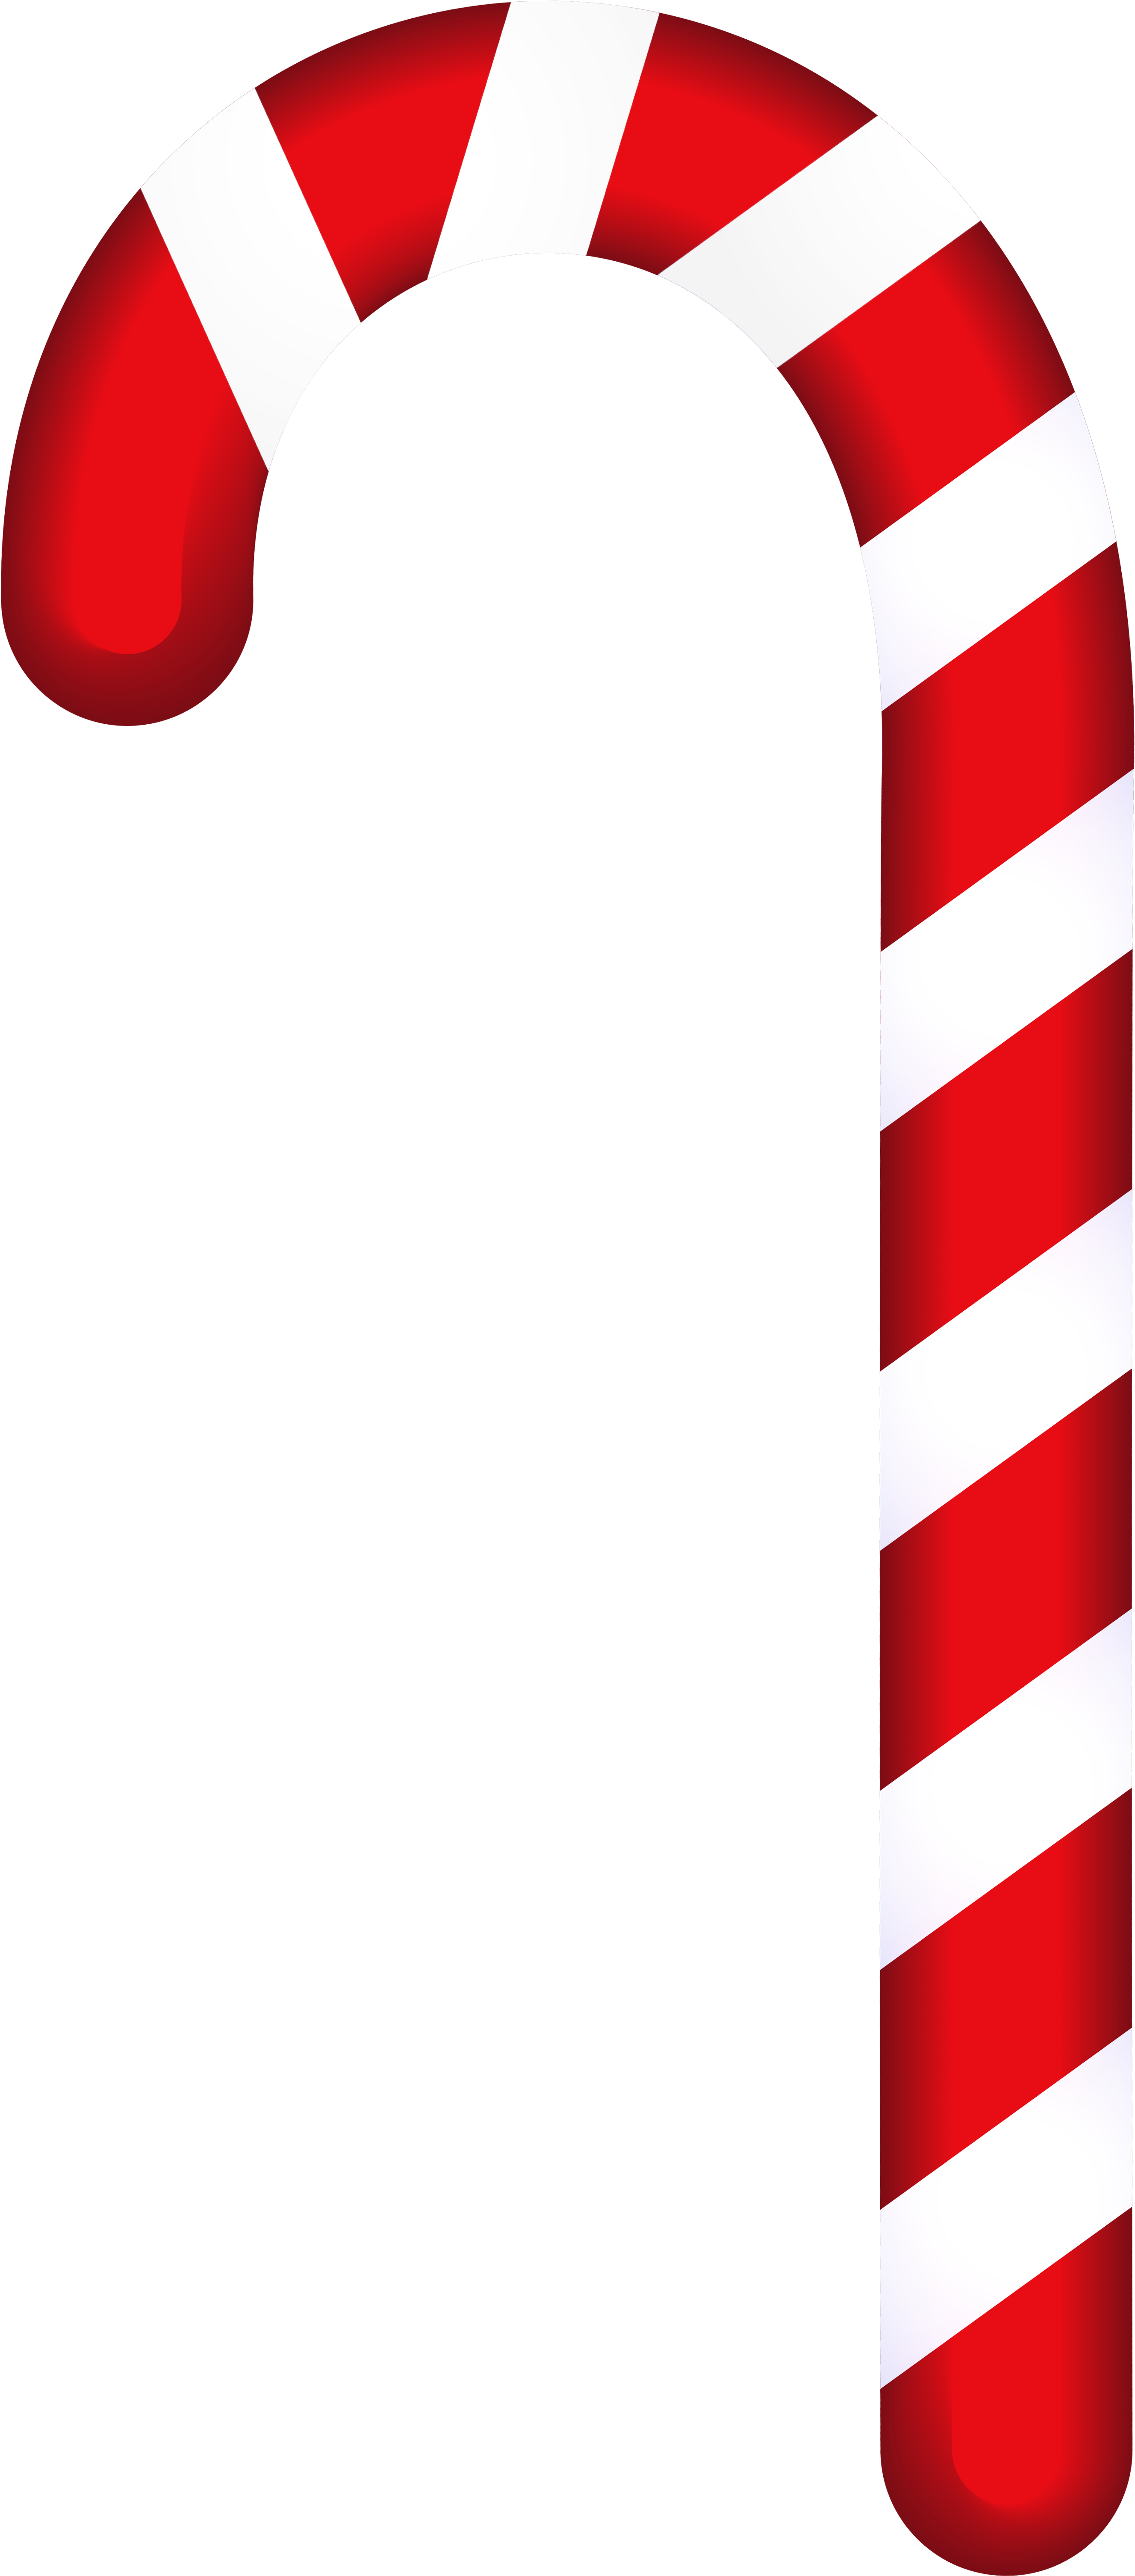 Candy Cane Clip Art Image - Candy Cane Clip Art Png (2948x6268)